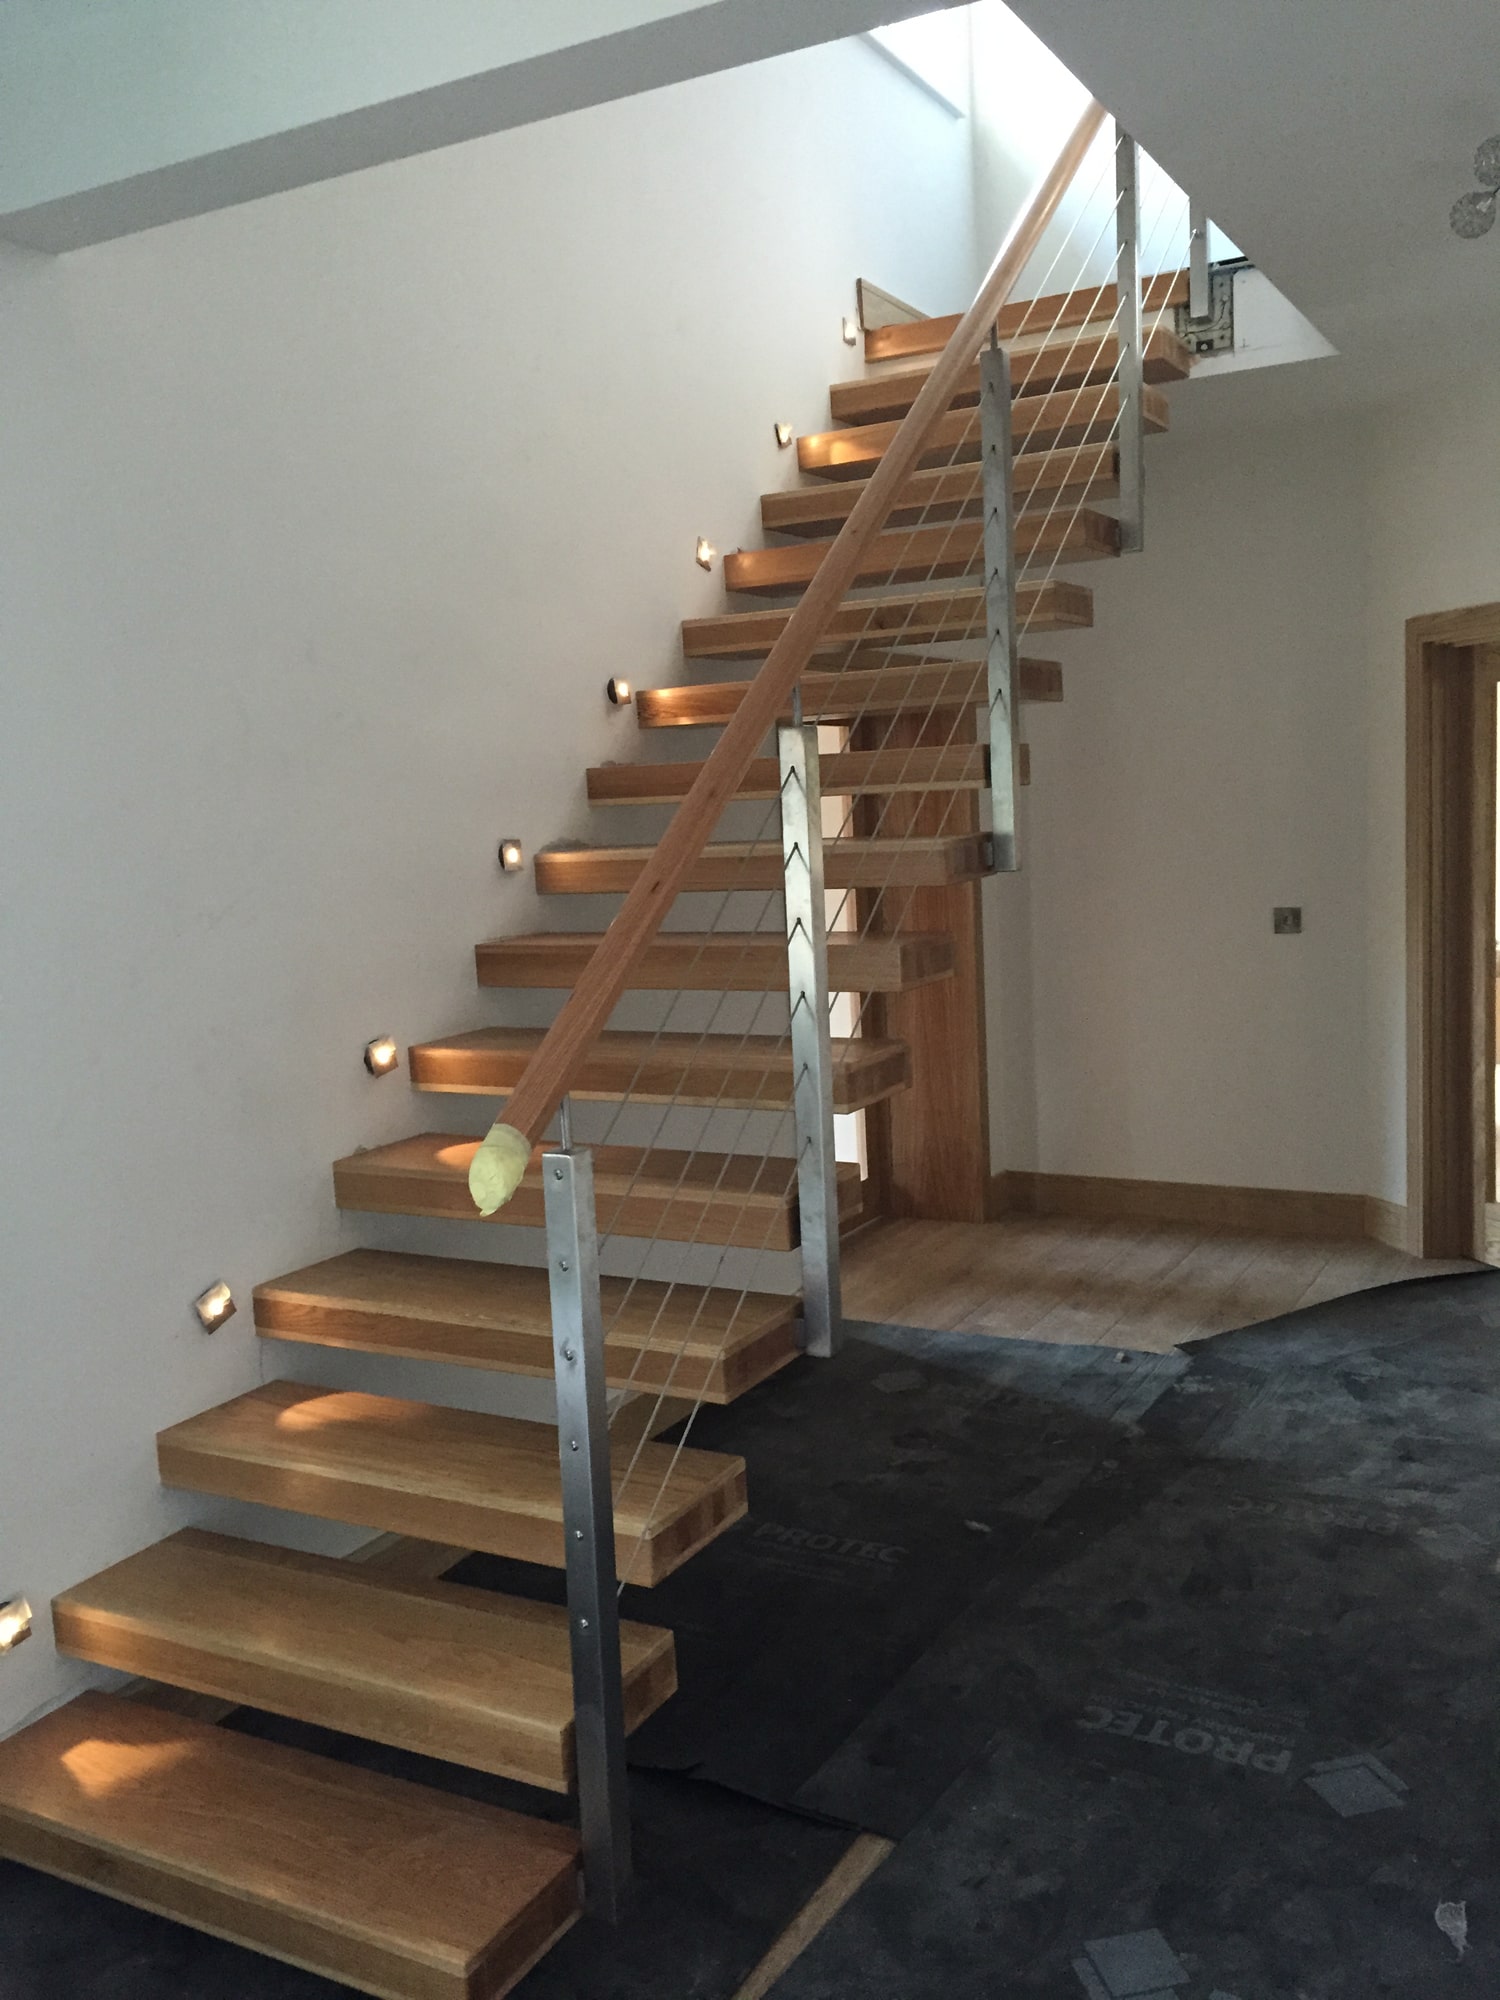 Architectural - SX Engineering - Floating stairs 2 ss wire rope balustrade